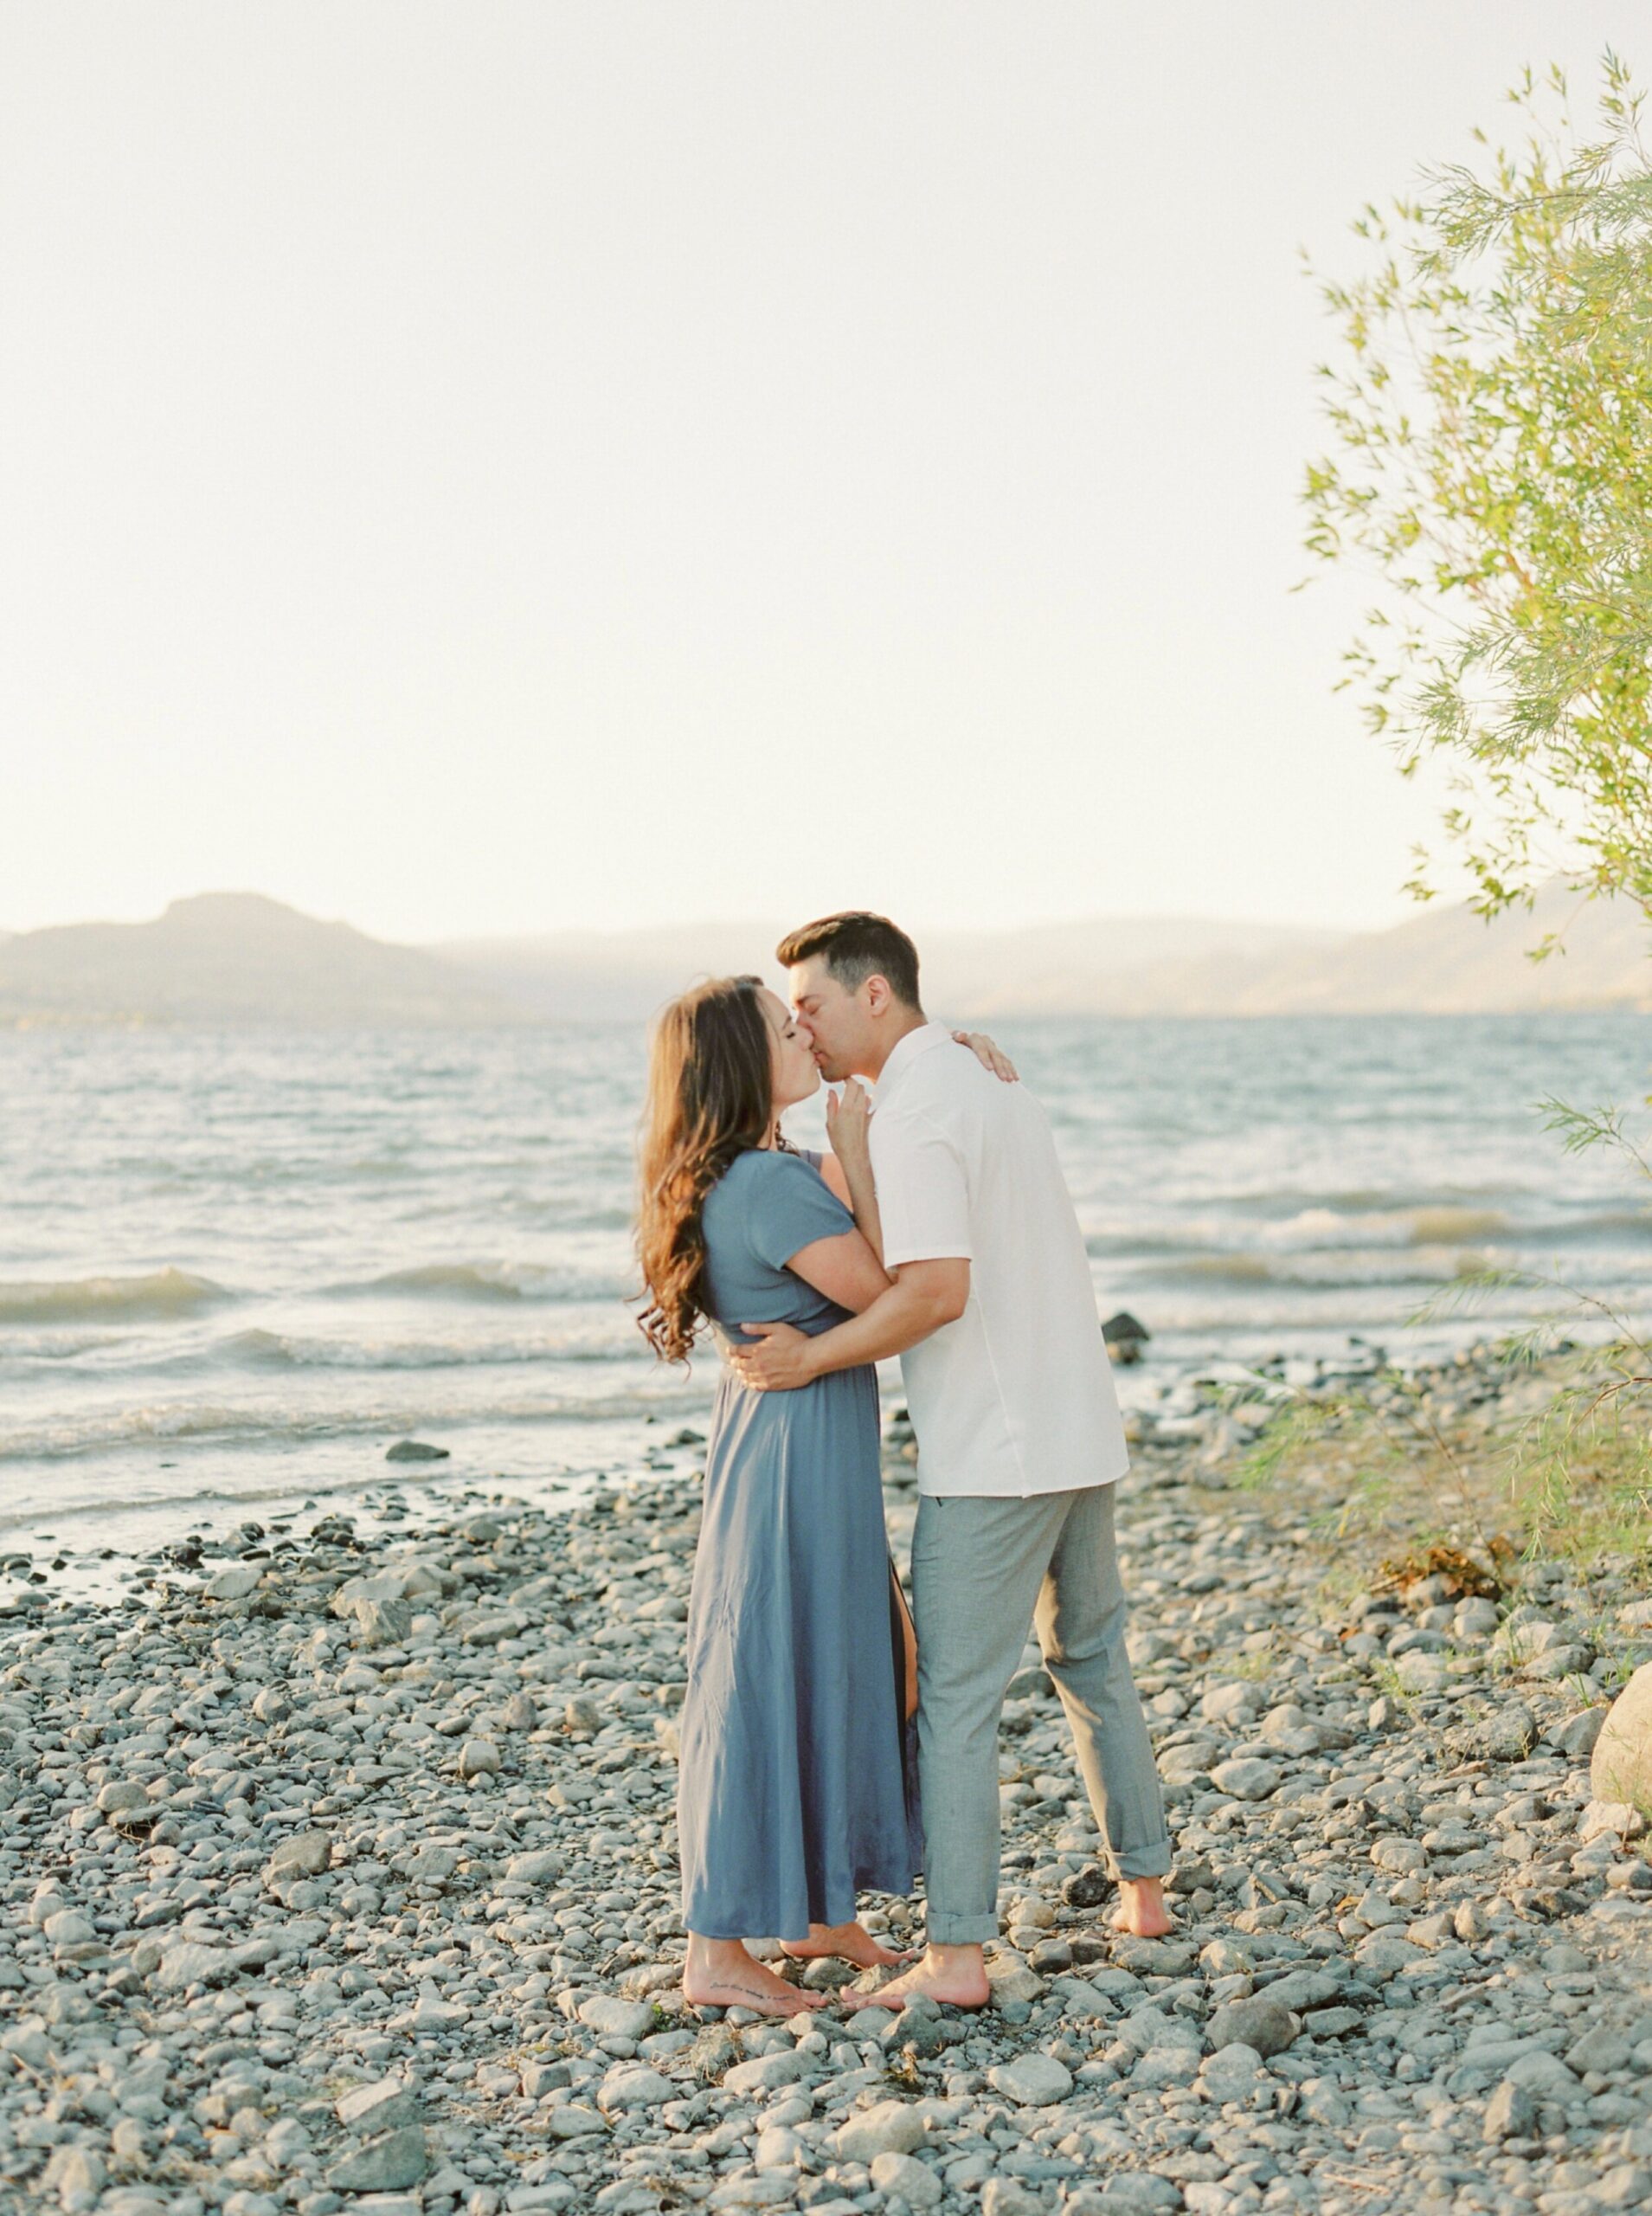  beach session at sunset in kelowna okanagan penticton vineyard on the naramata bench | summer engagement session | outfit ideas for couples photos | film photographer Jusitne Milton 